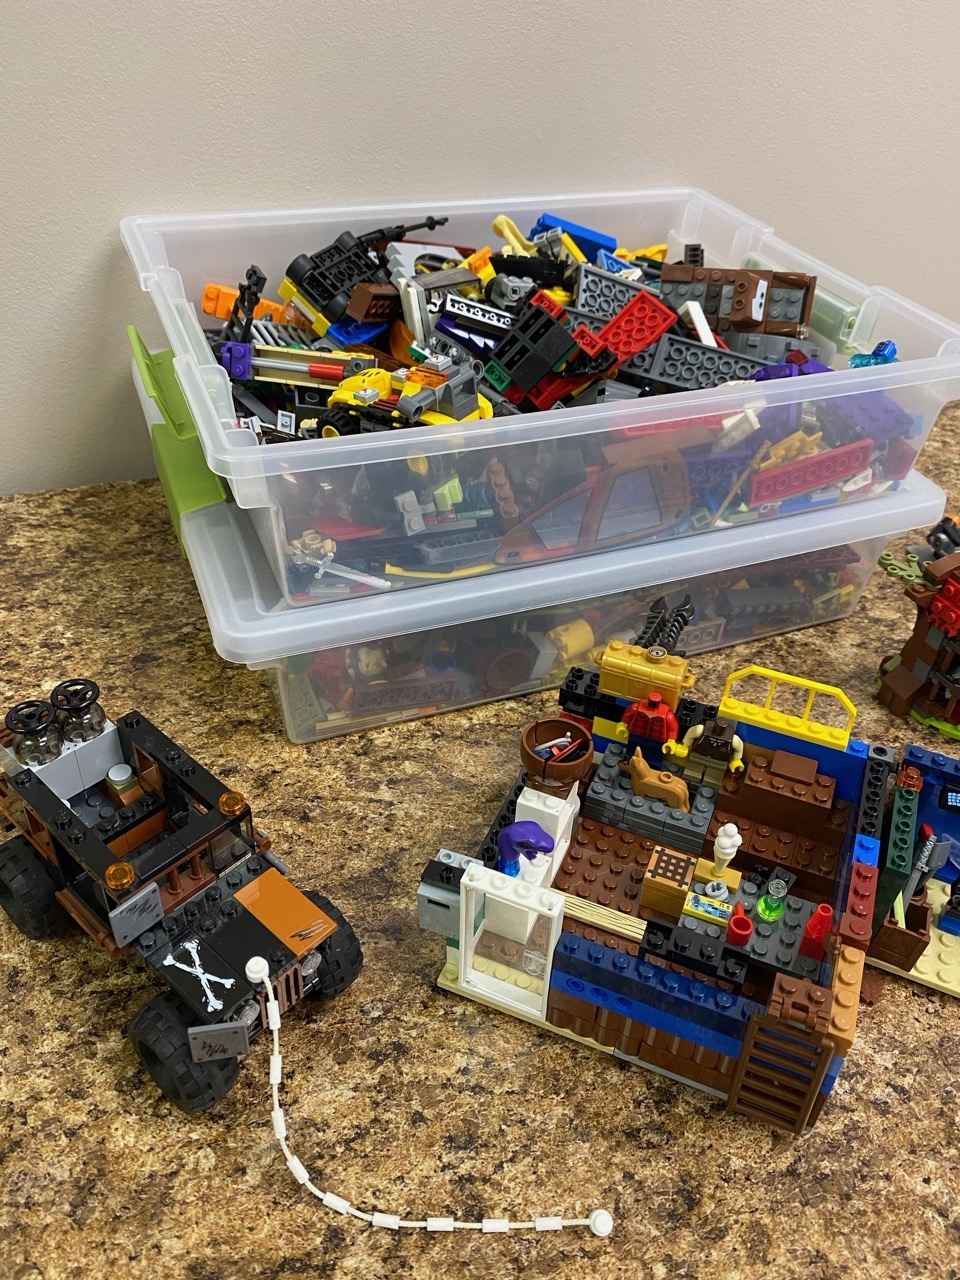 DIY Lego Storage Ideas for a Small Space: Week 4 - Hello Central